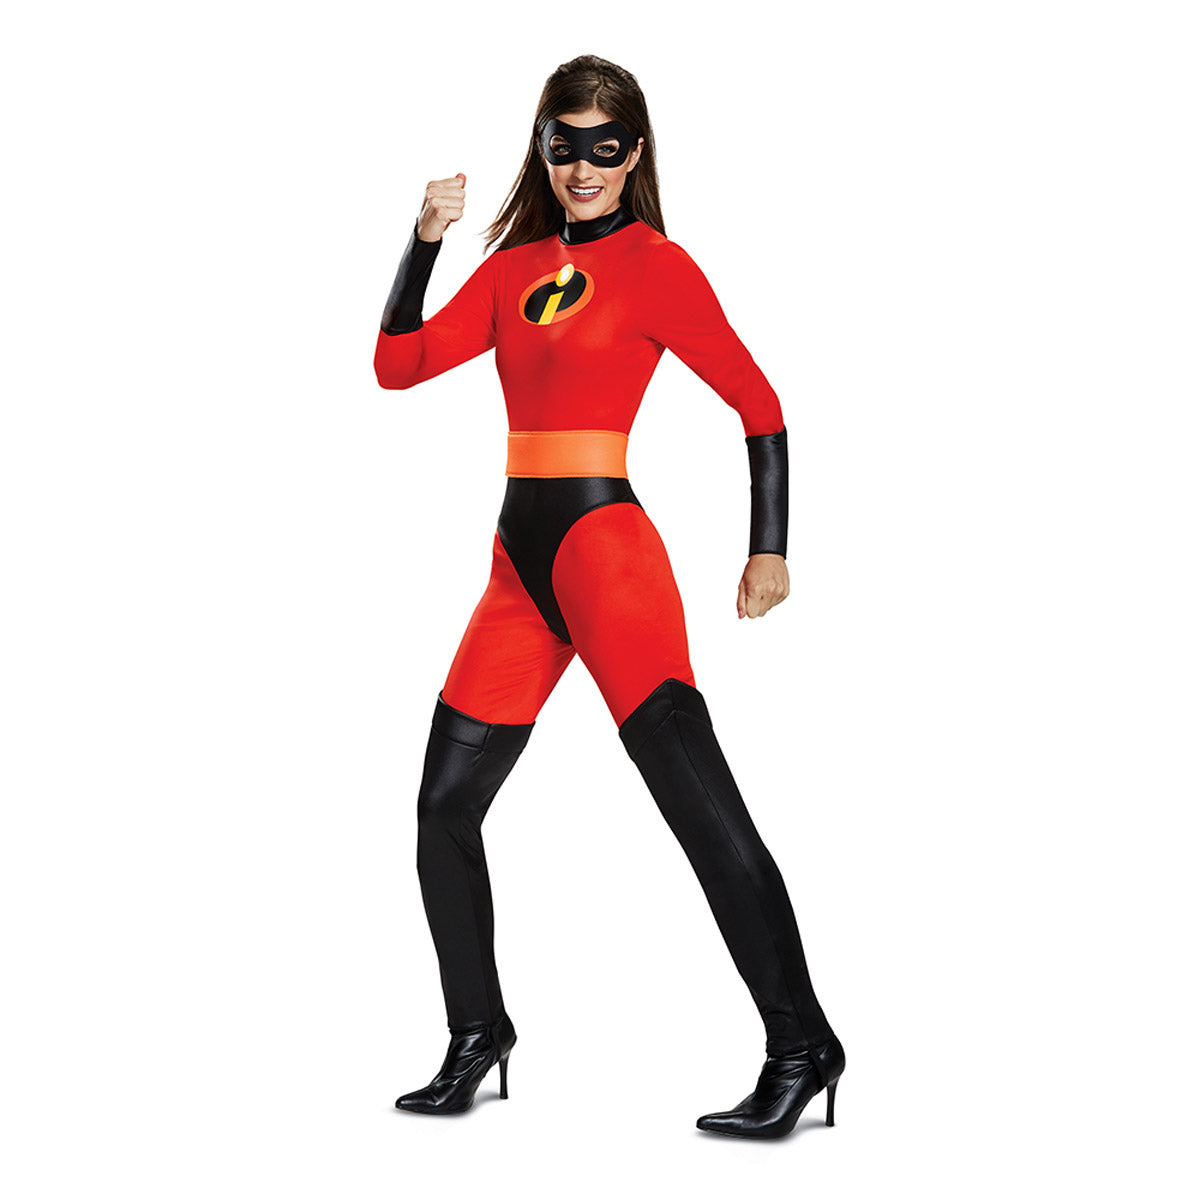 Mrs. Incredible Classic Adult Disguise 66835